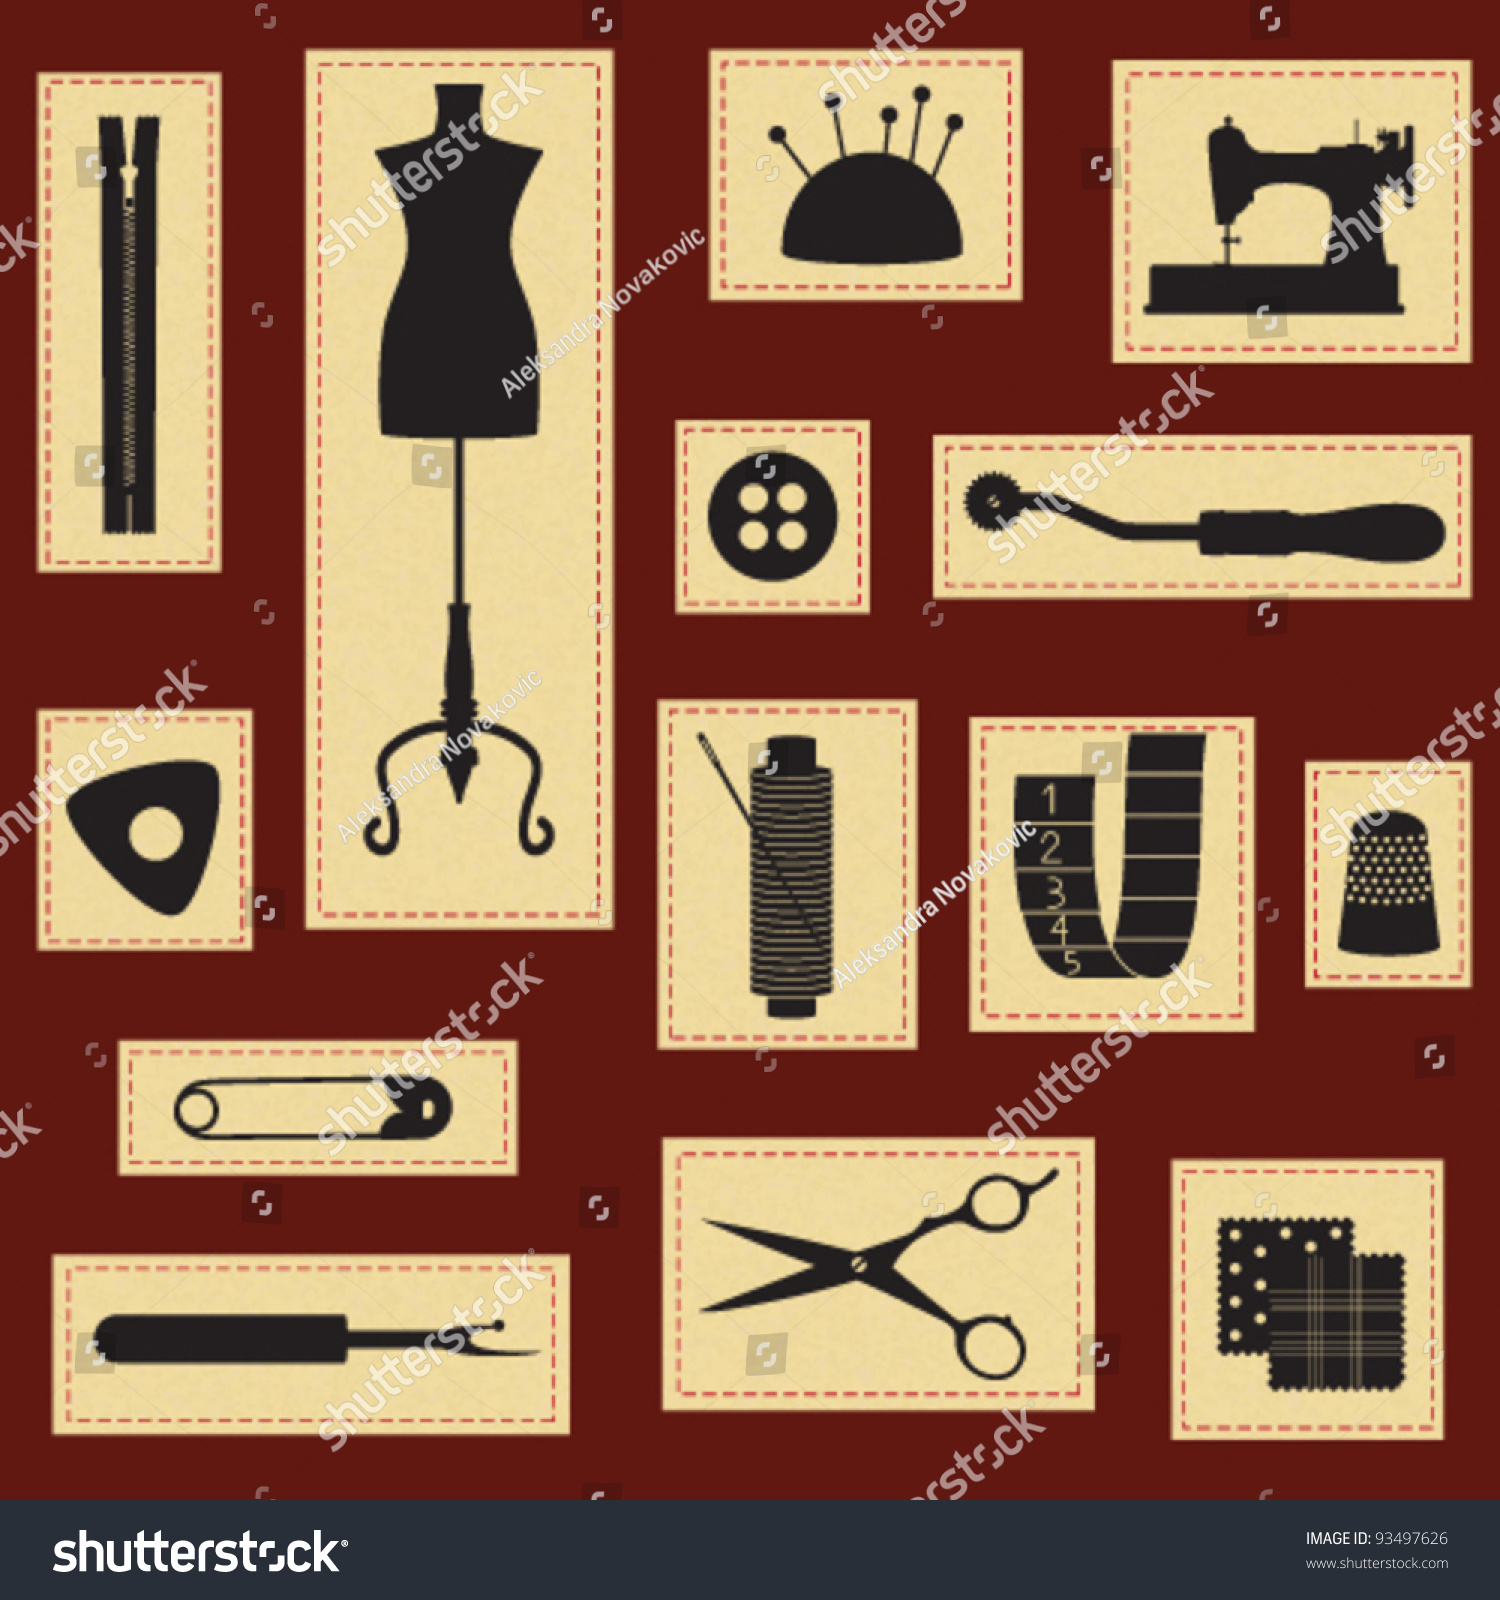 Vintage Sewing And Tailoring Icons Set Stock Vector Illustration ...